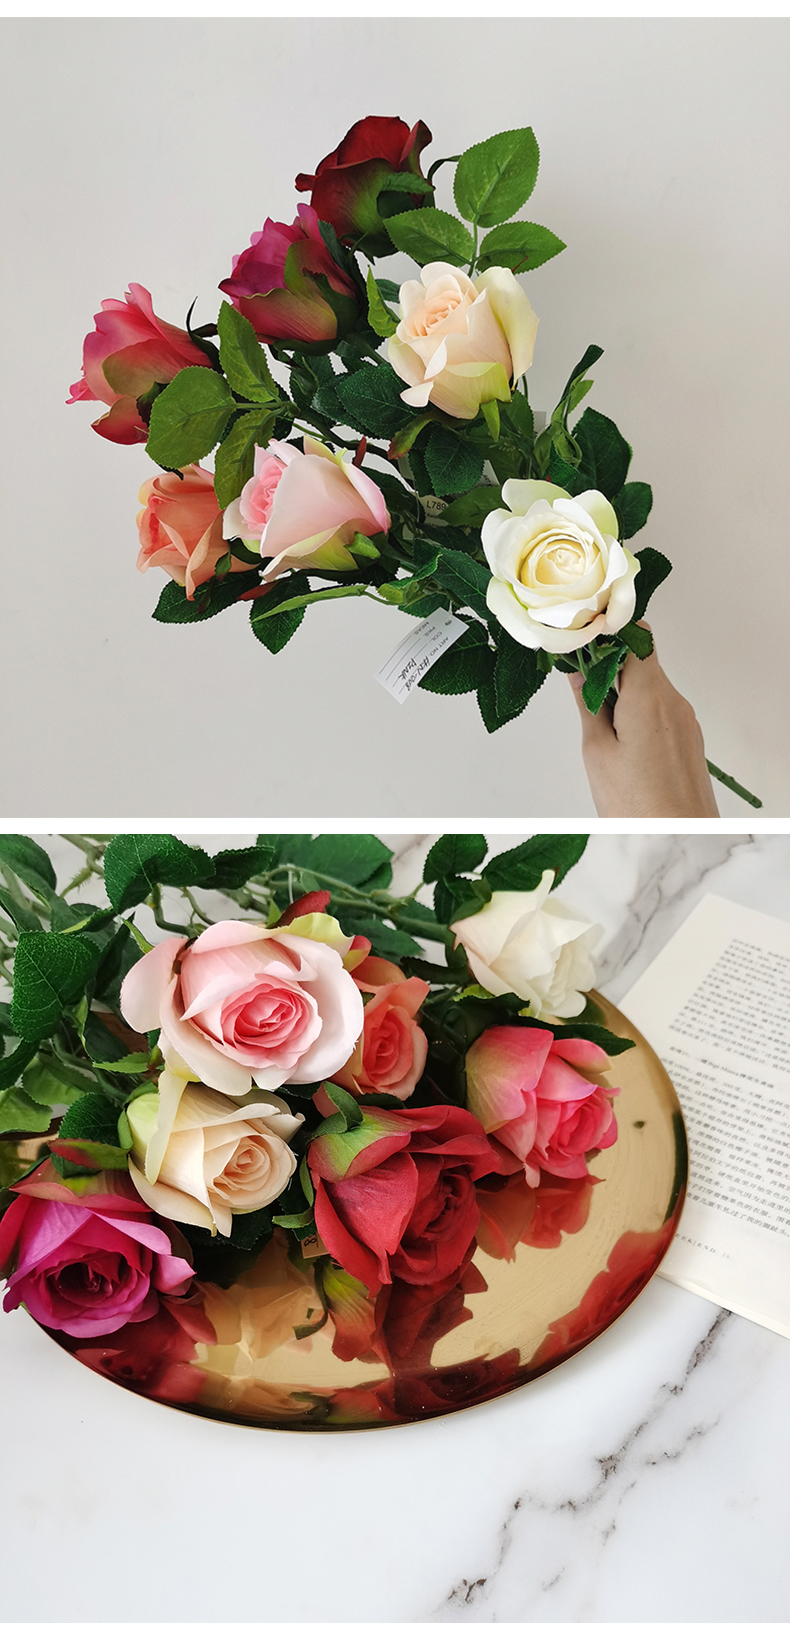 Cheap silk flowers Artificial roses flower branches for home decoration popular simulation rose stem decor